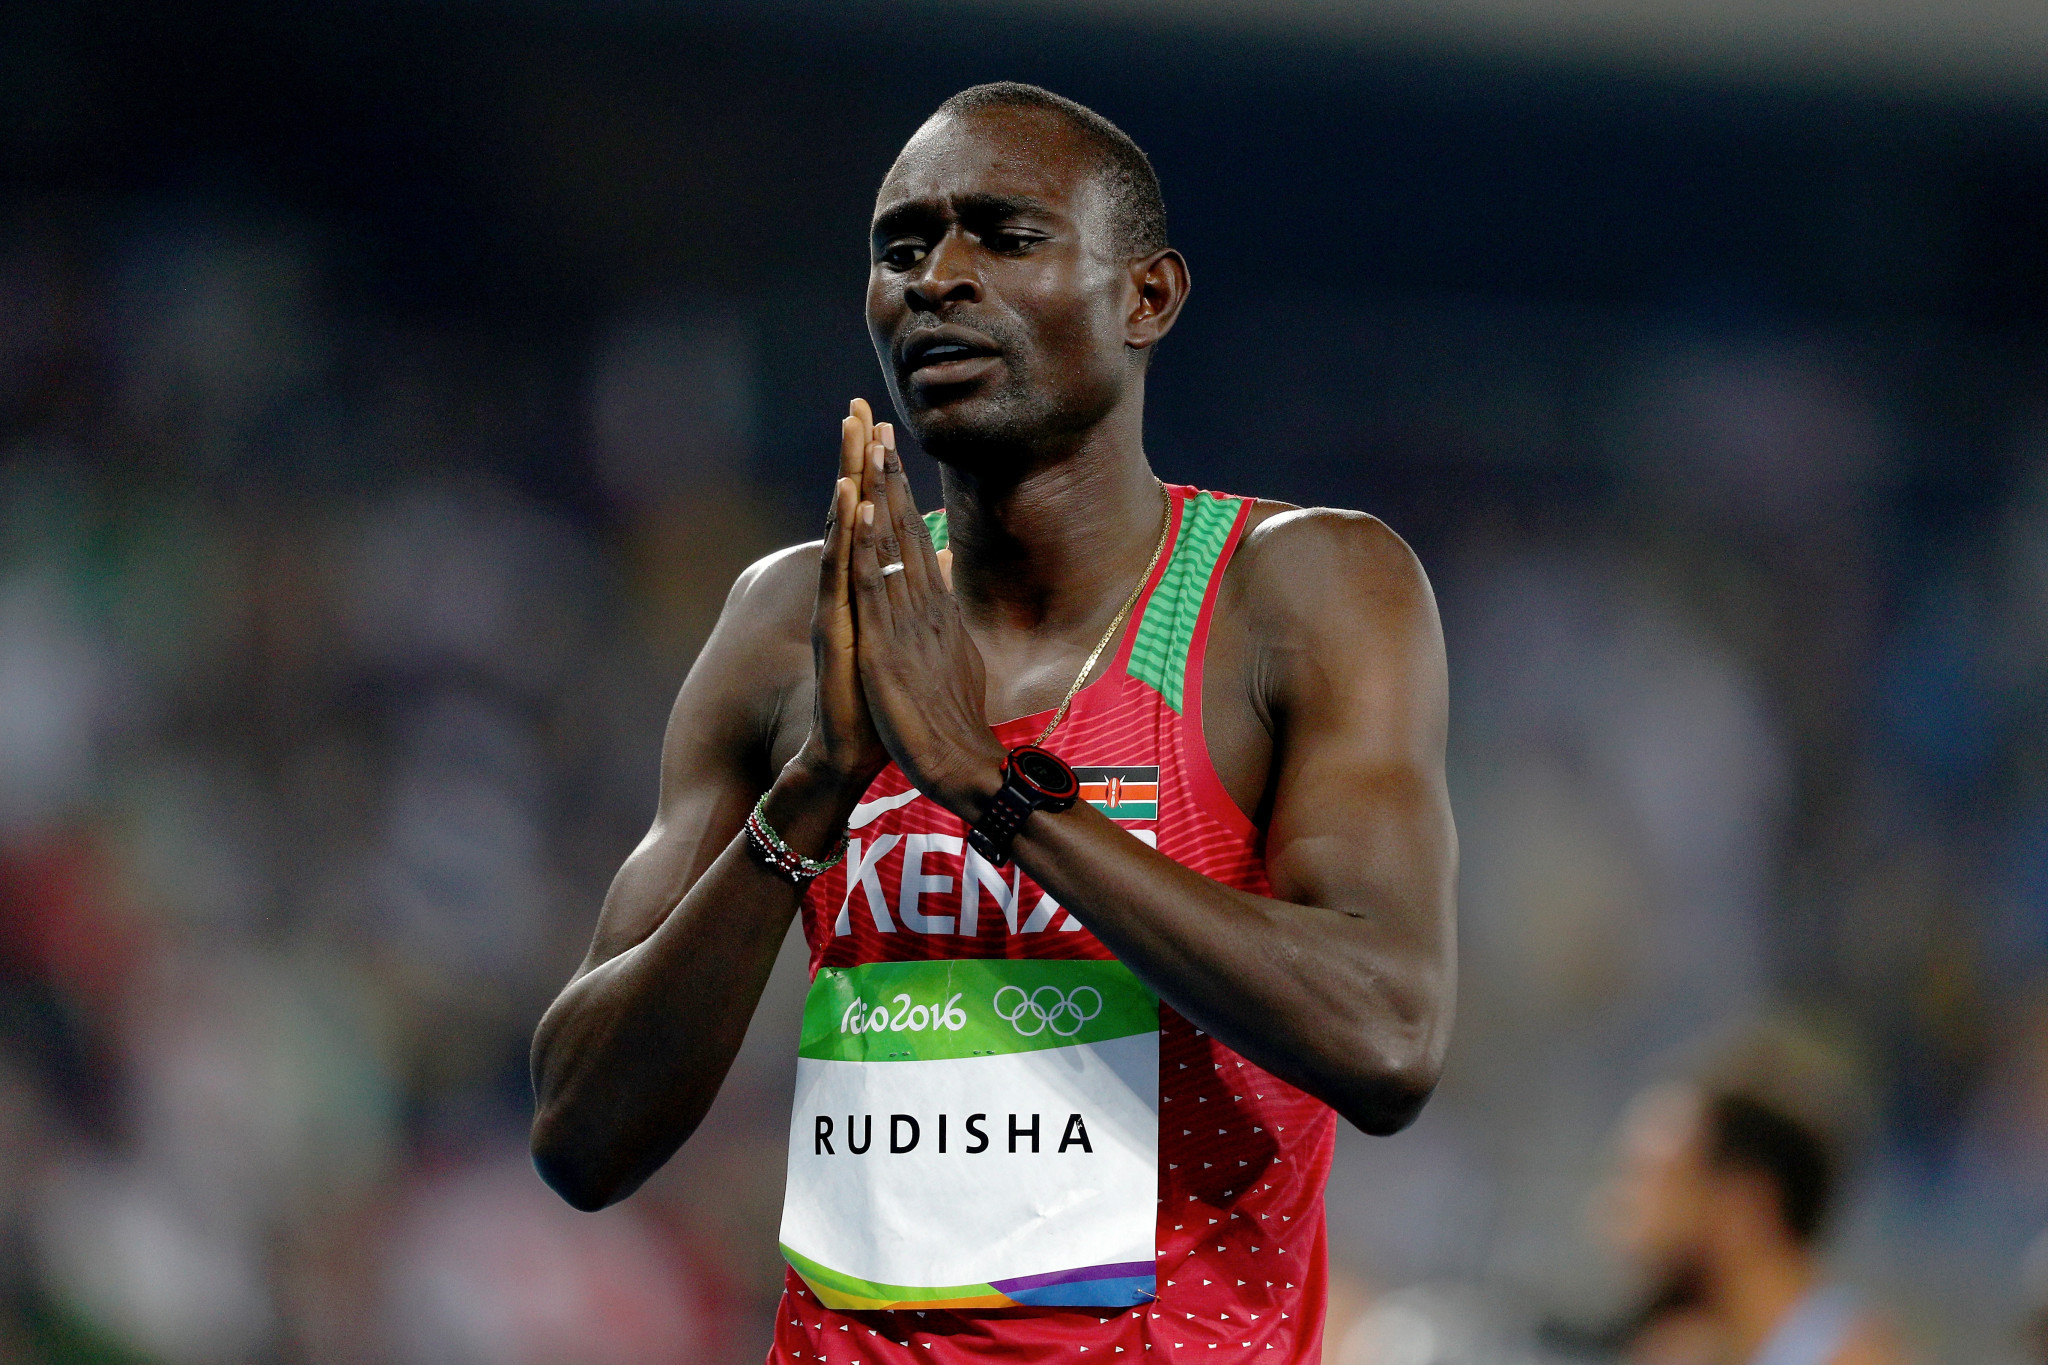 Ex-runner David Rudisha is calling for global action against air pollution. GETTY IMAGES